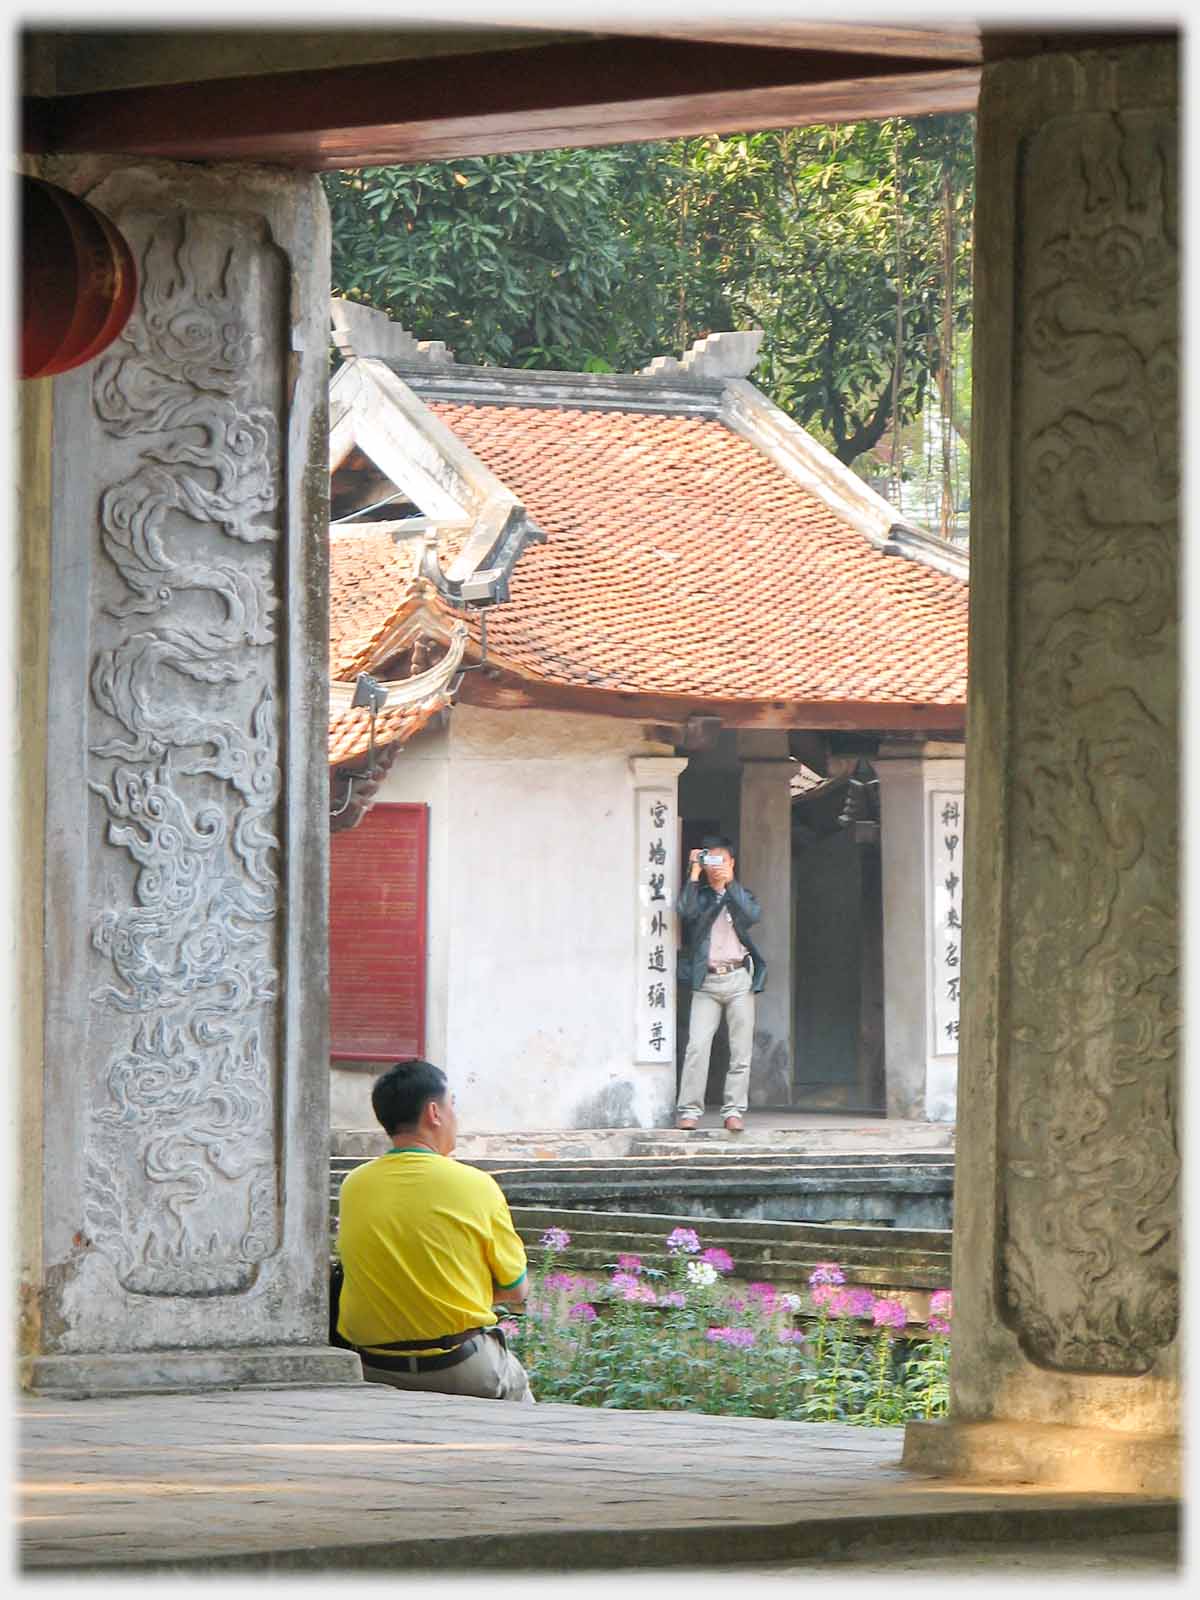 Sideways view from Khue Van Cuc towards small stela pavilion.